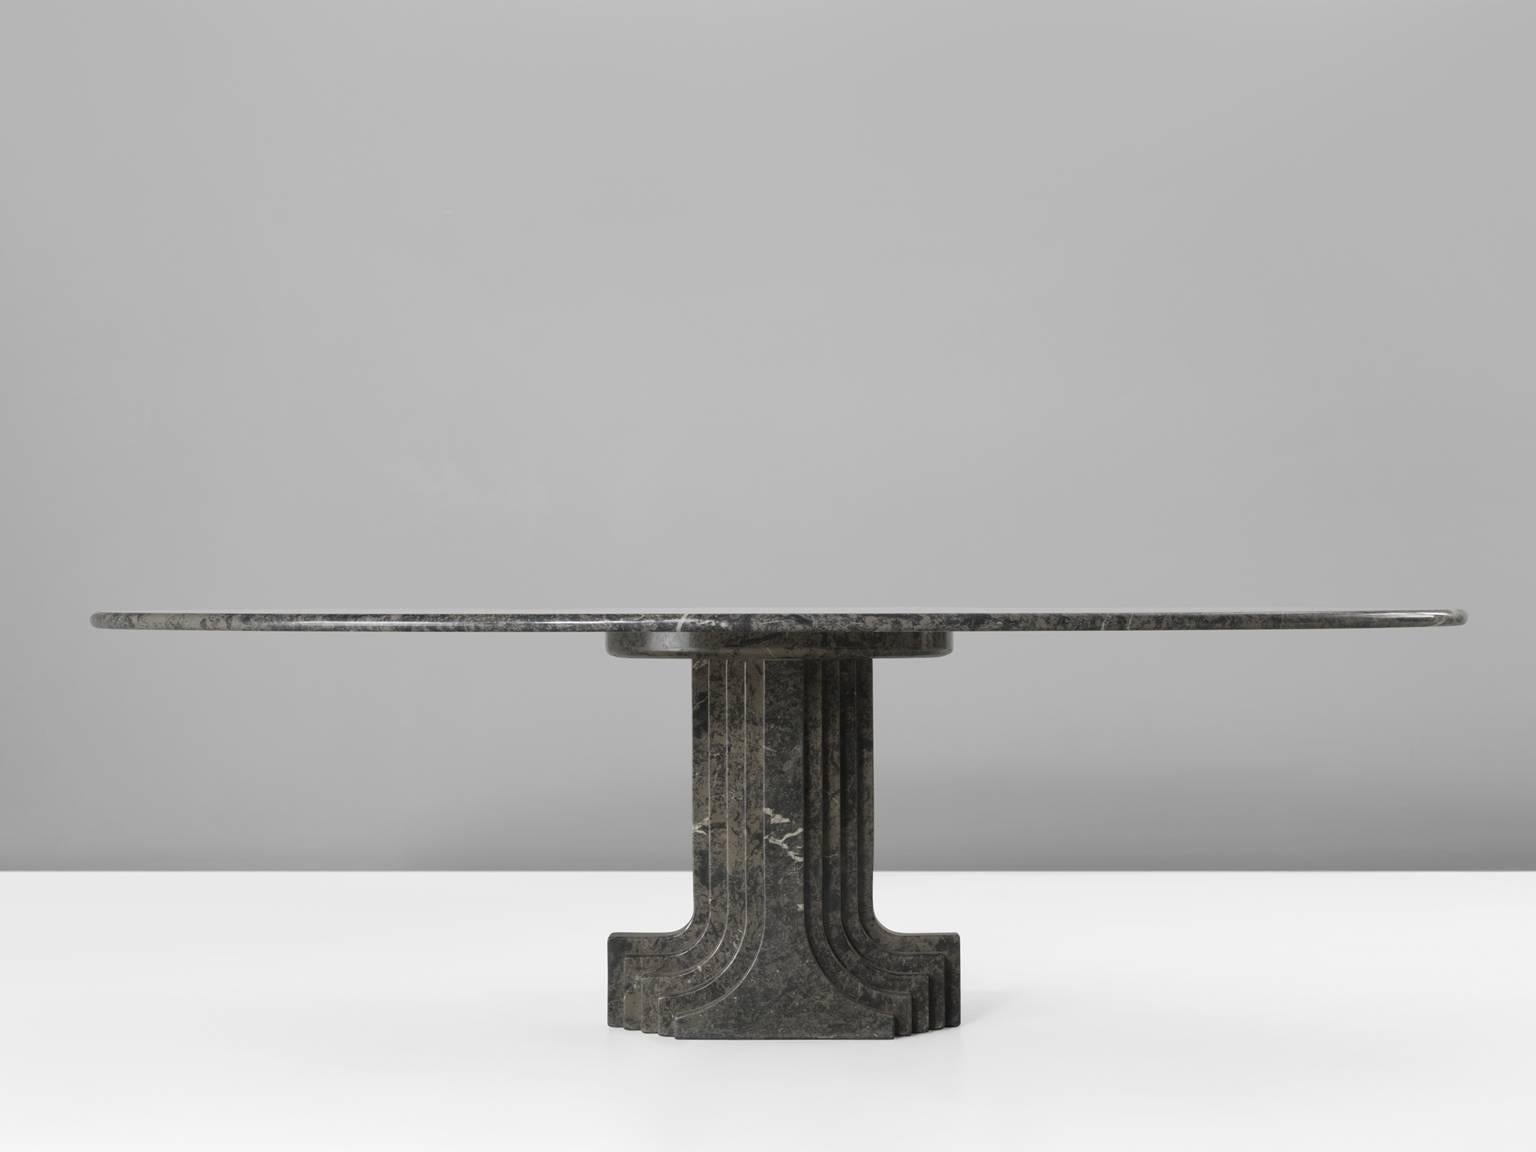 Carlo Scarpa, oval marble table, Italy, 1970.

Carlo Scarpa (1906-1978) was trained as an architect and influenced by various themes. His main focus was the material itself followed by nature, Venetian and Japanese culture. This 'Samo' marble table